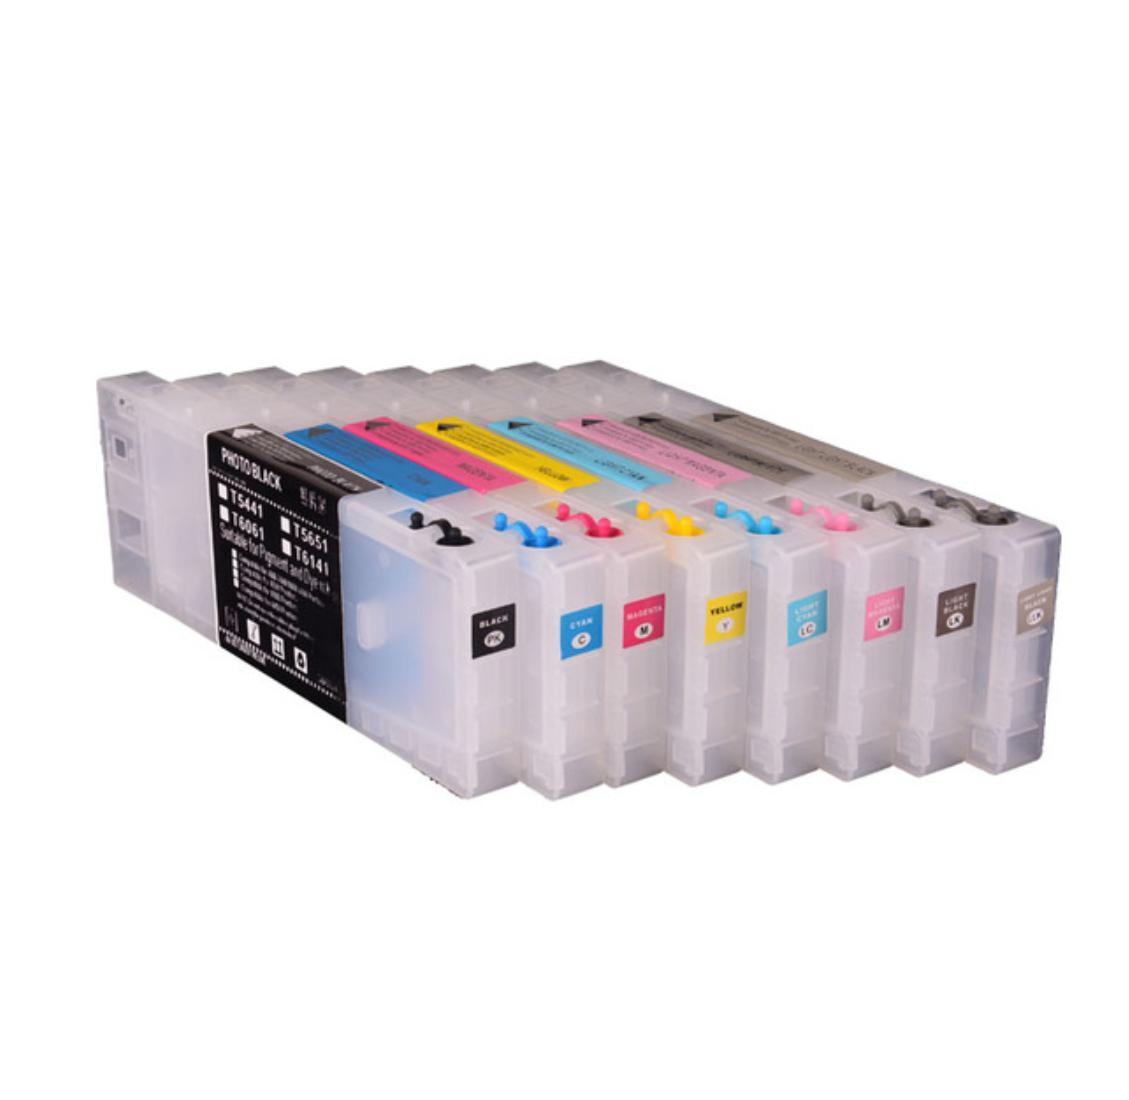 350ML Refillable Ink Cartridge with Resettable Chip for EP Stylus Pro 7880 9880